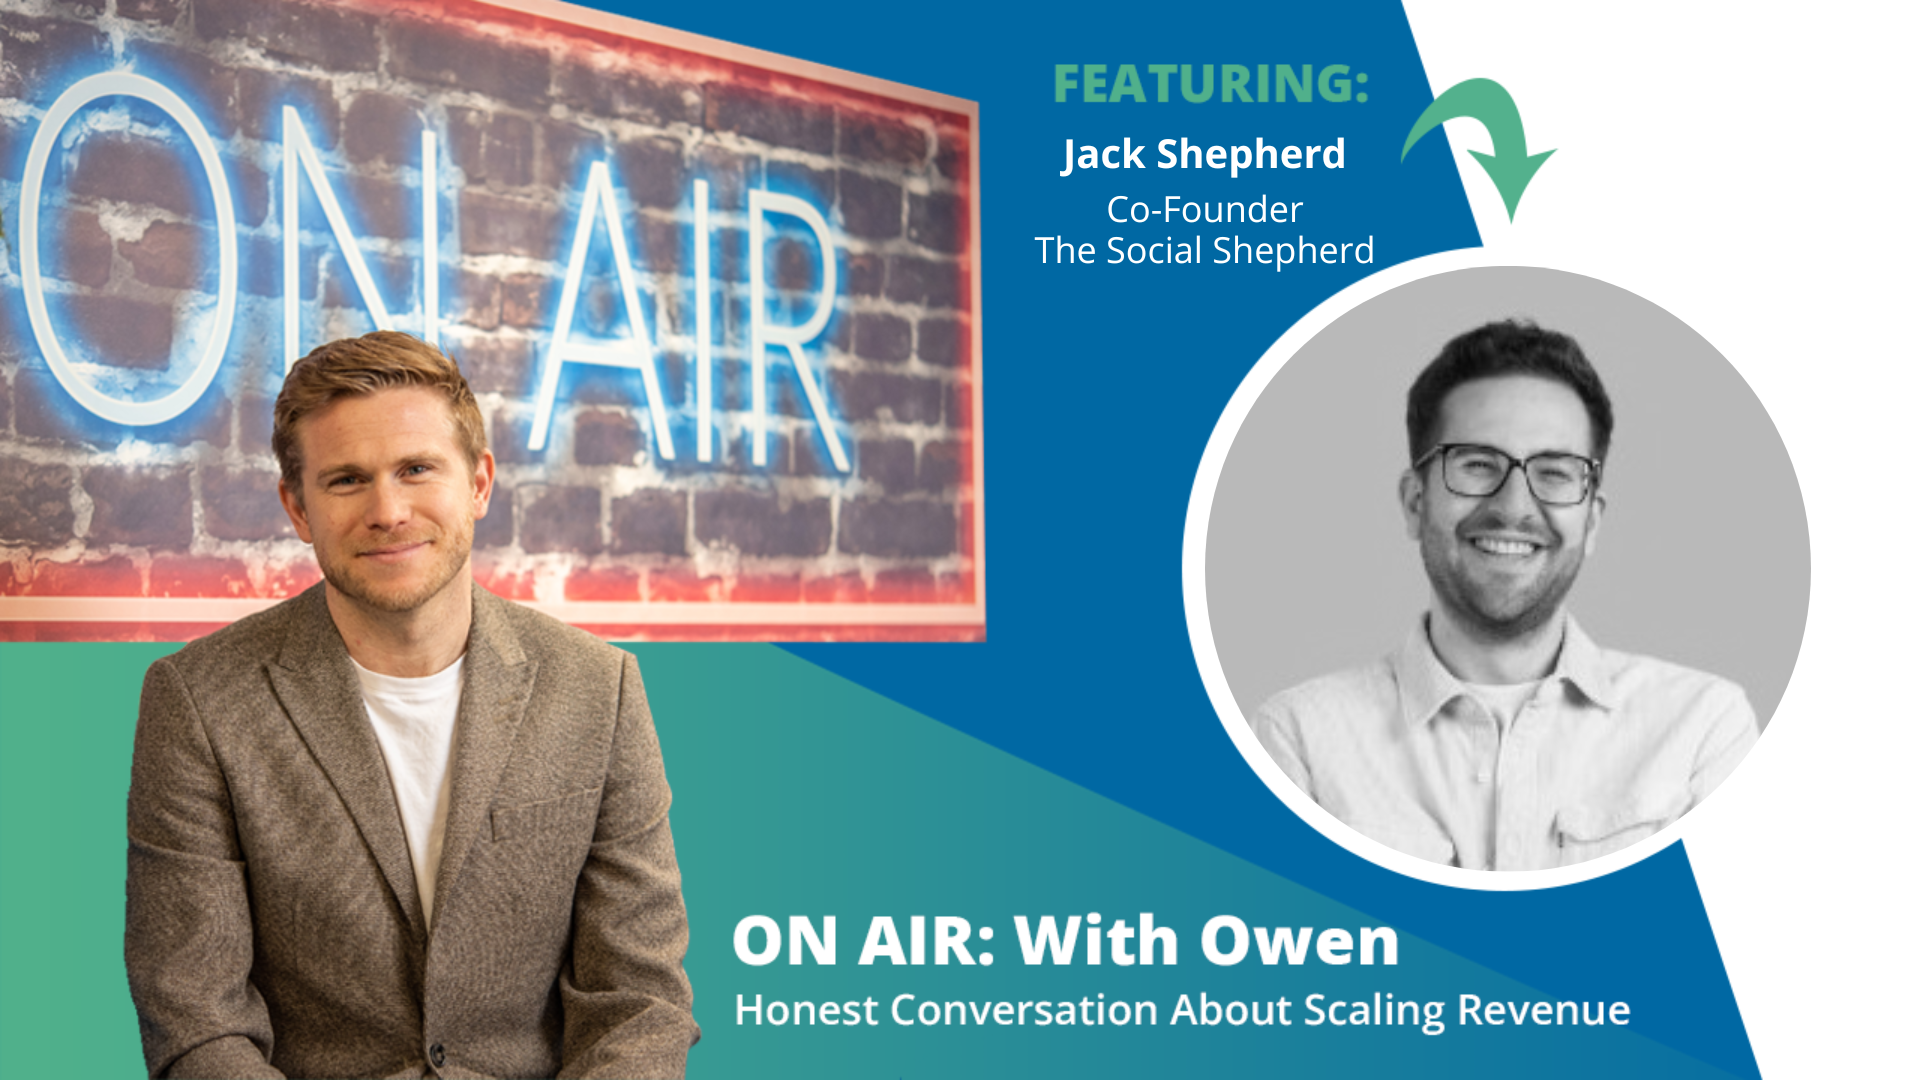 ON AIR: With Owen Episode 68 Featuring Jack Shepherd – Co-Founder, The Social Shepherd